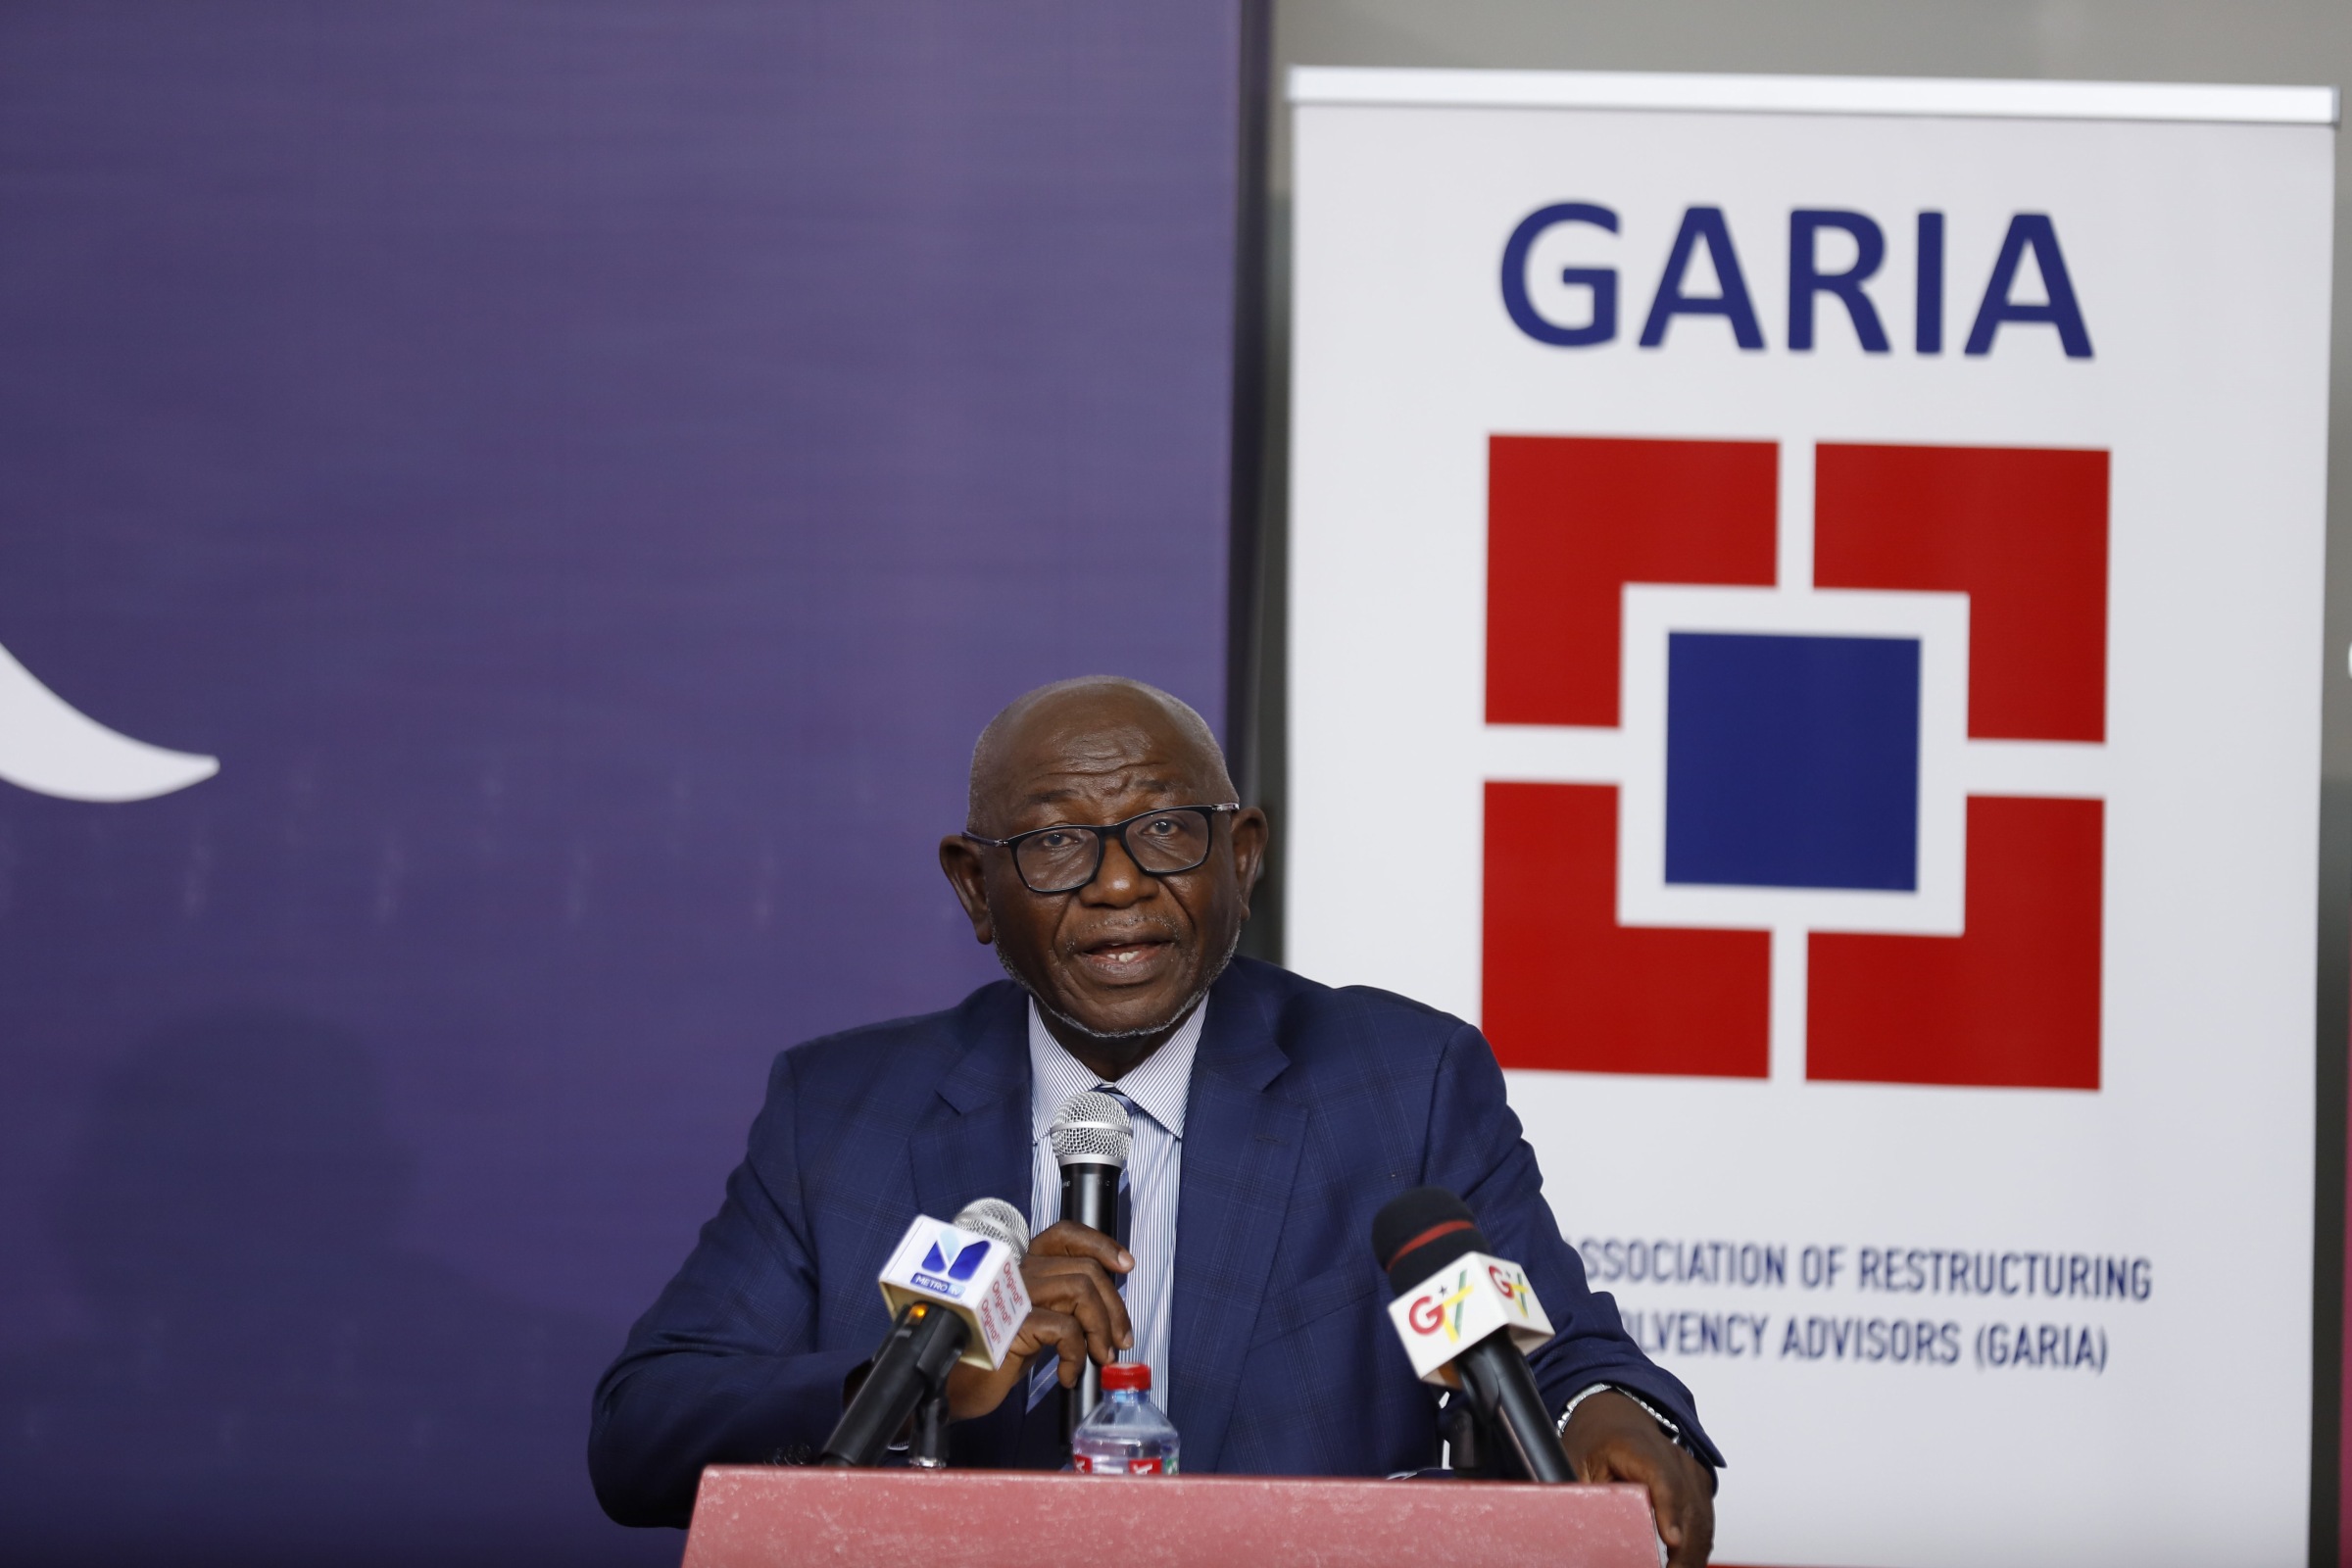 Felix Addo, President of GARIA giving remarks at the opening of the seminar